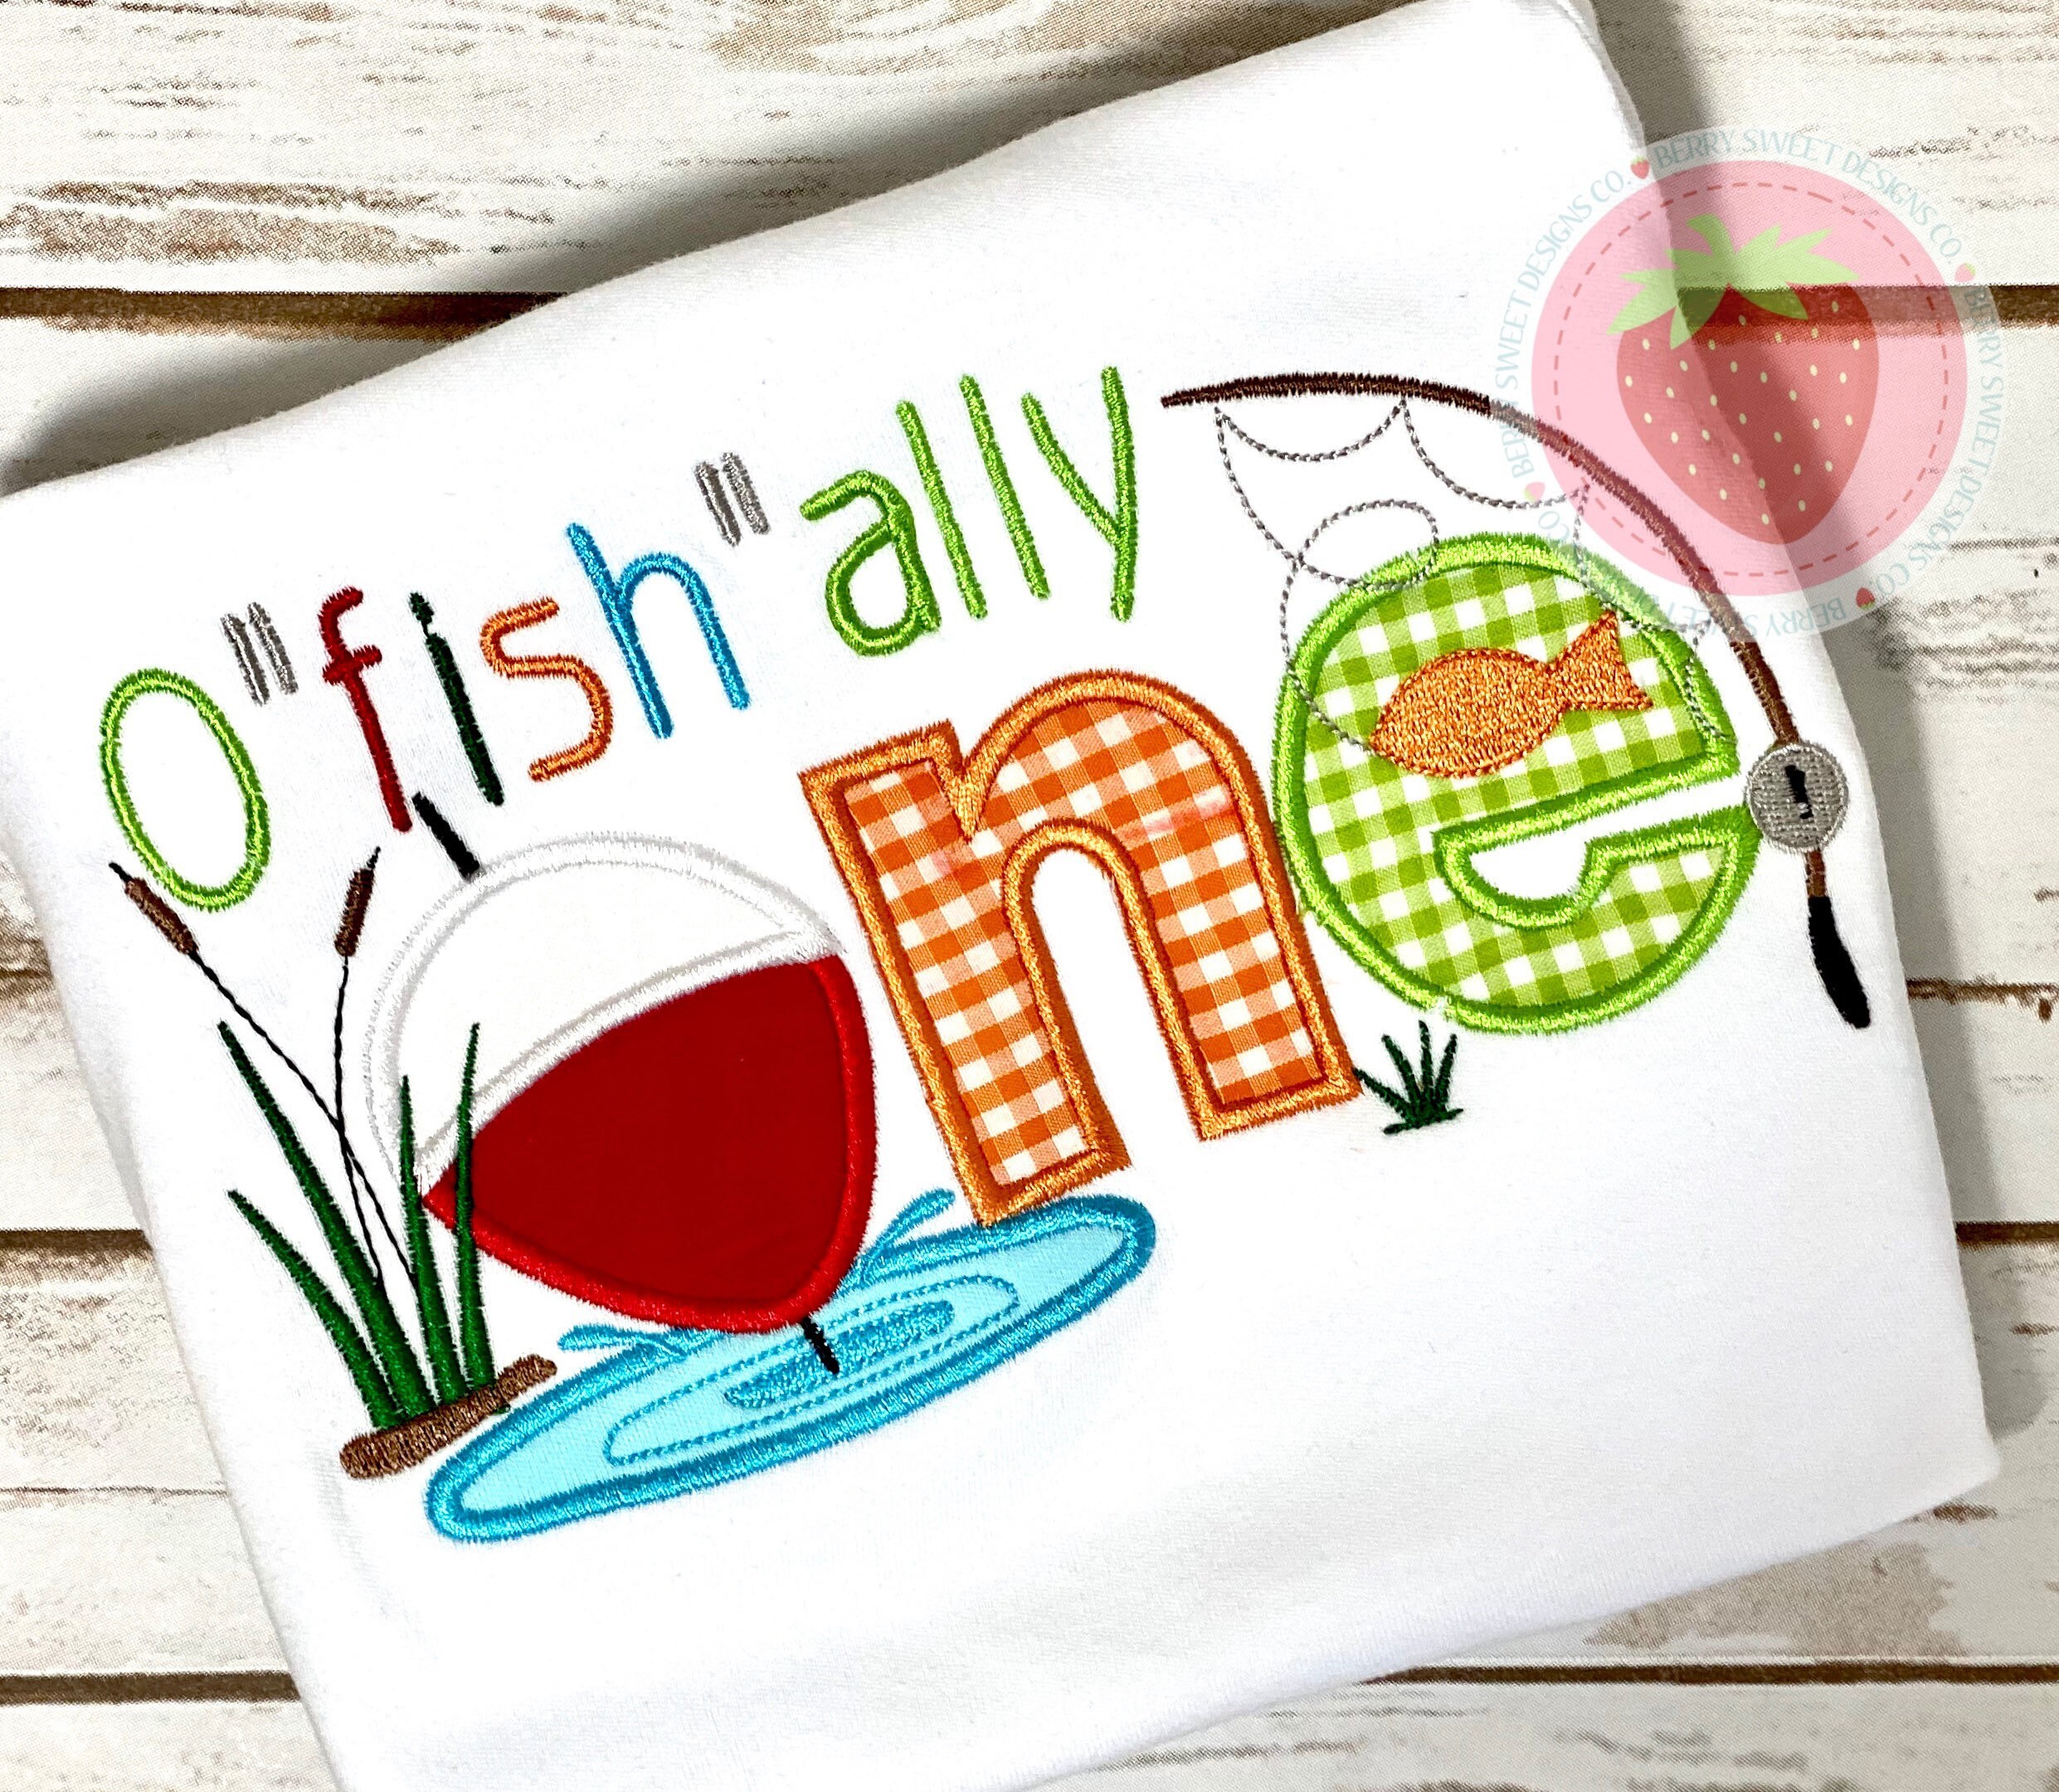 O “FISH” Ally ONE embroidered appliqué design shirt